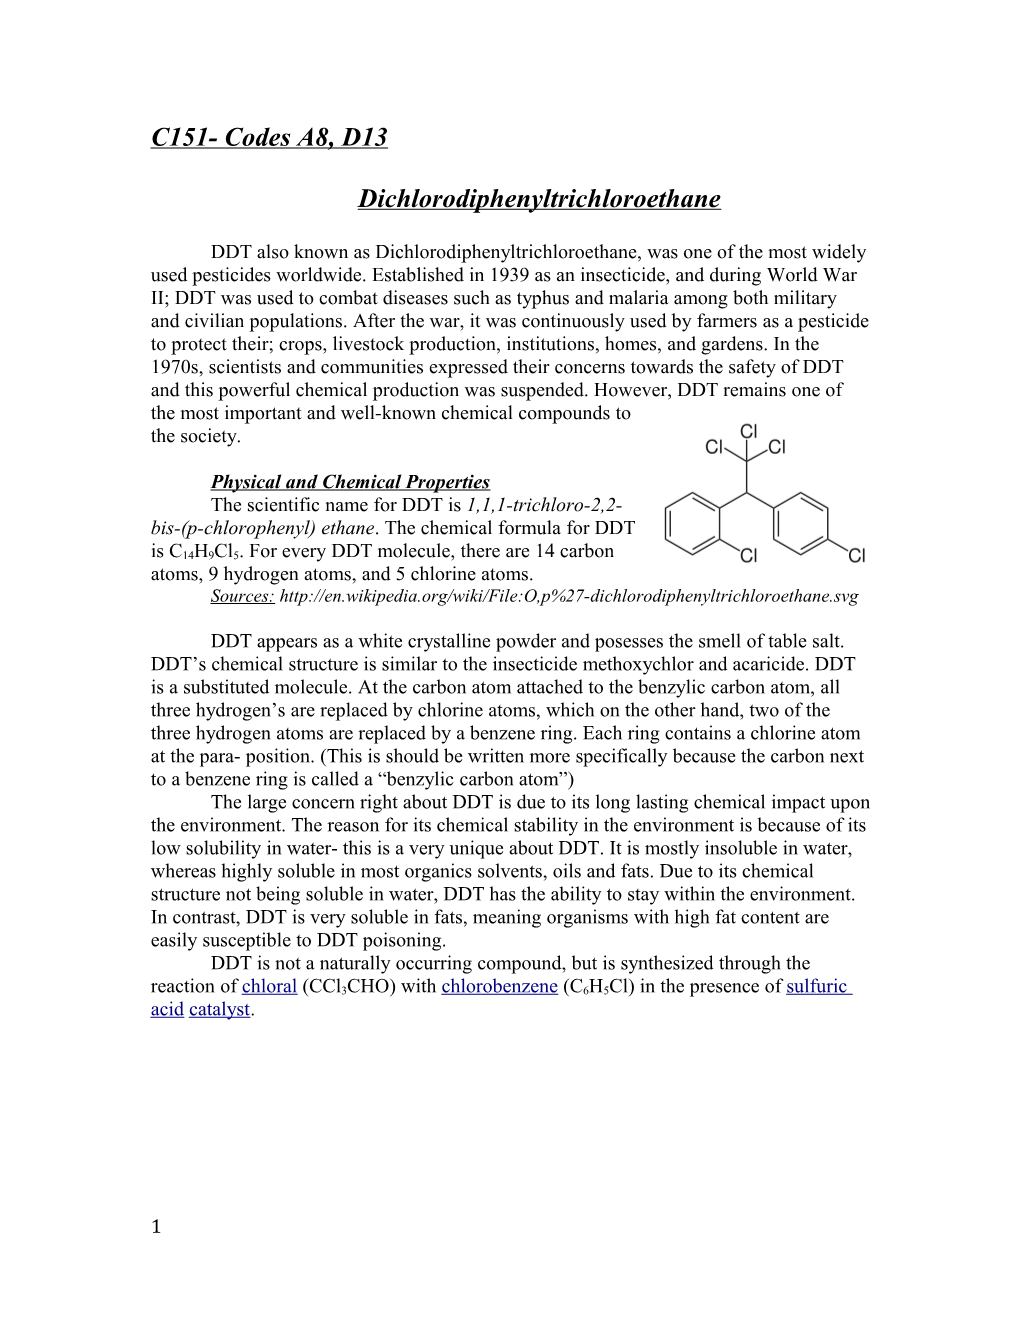 DDT Also Known As Dichlorodiphenyltrichloroethane, Was One of the Most Widely Used